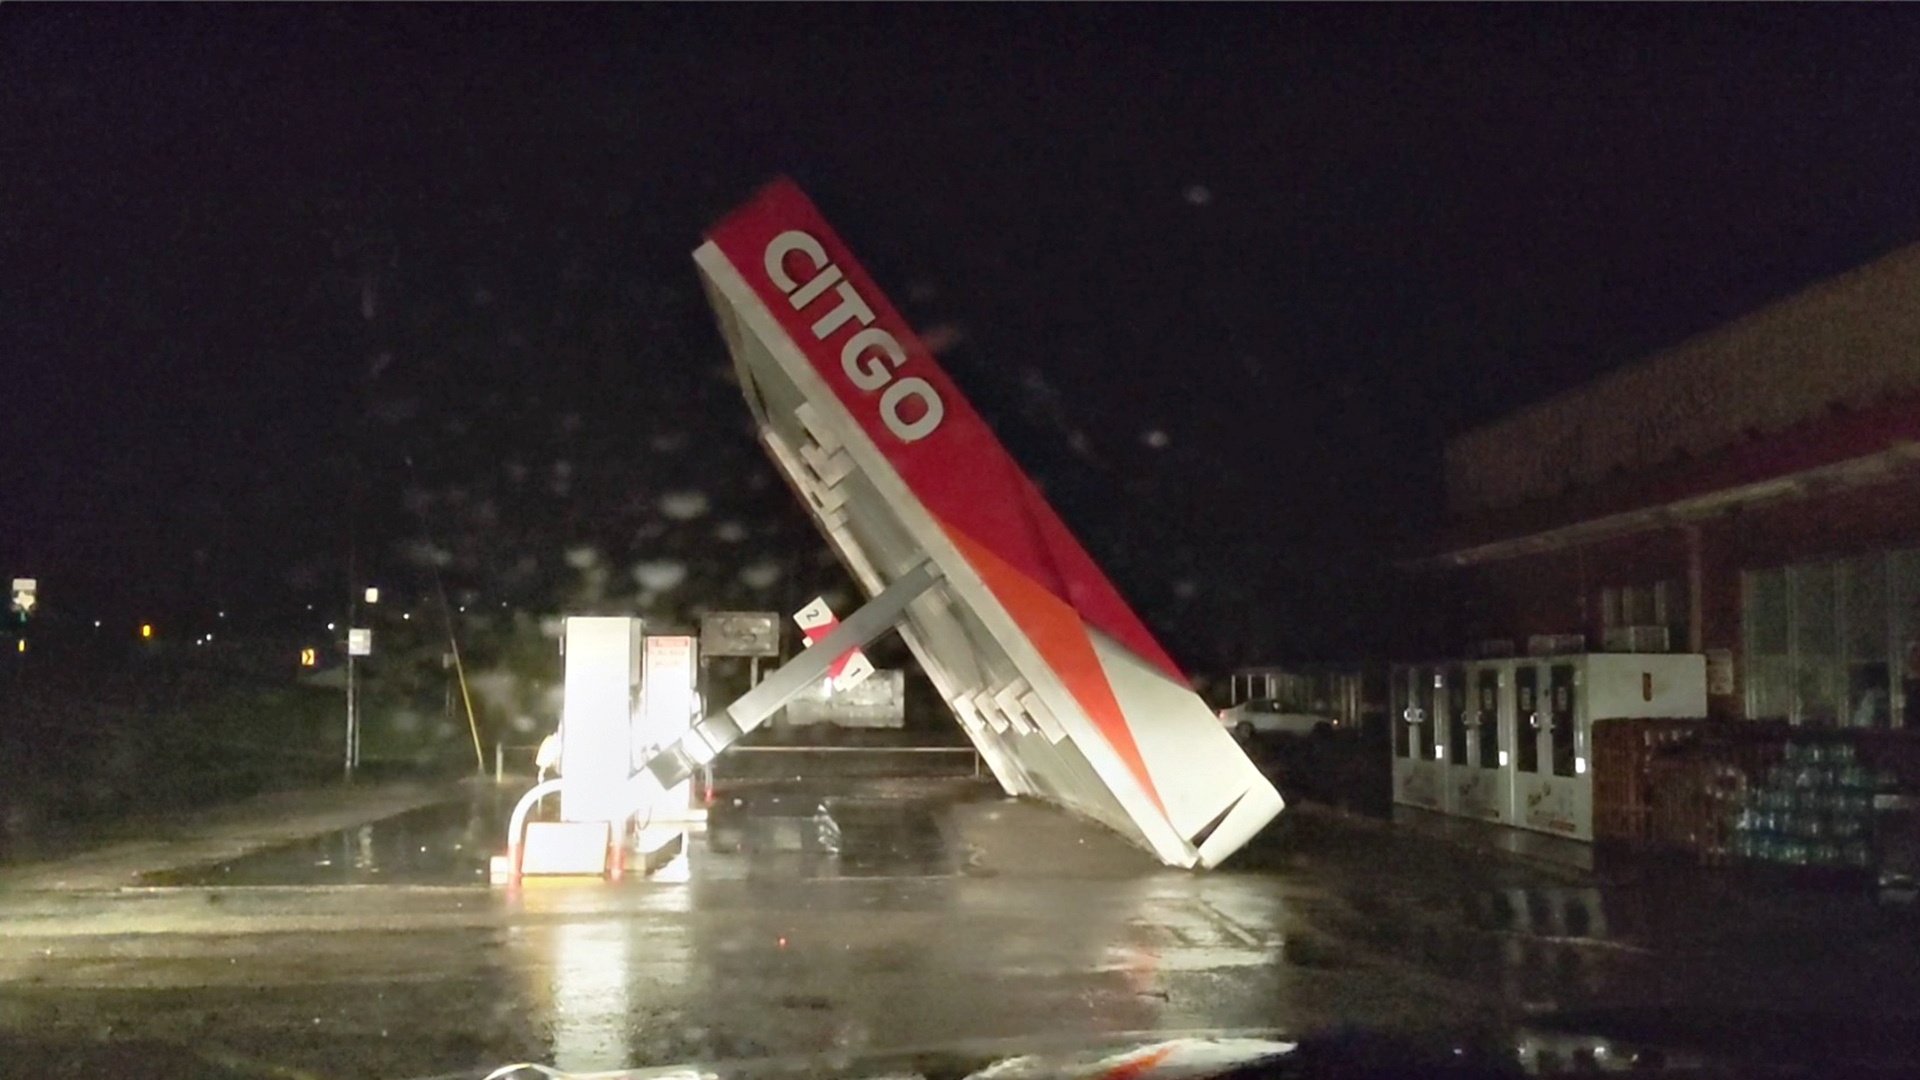 A CITGO gas station roof is blown away by Tropical Storm Nicholas in this still image from a social media video, Matagorda, Texas, U.S., Sept. 13, 2021. (Andrew Dubya via Reuters)